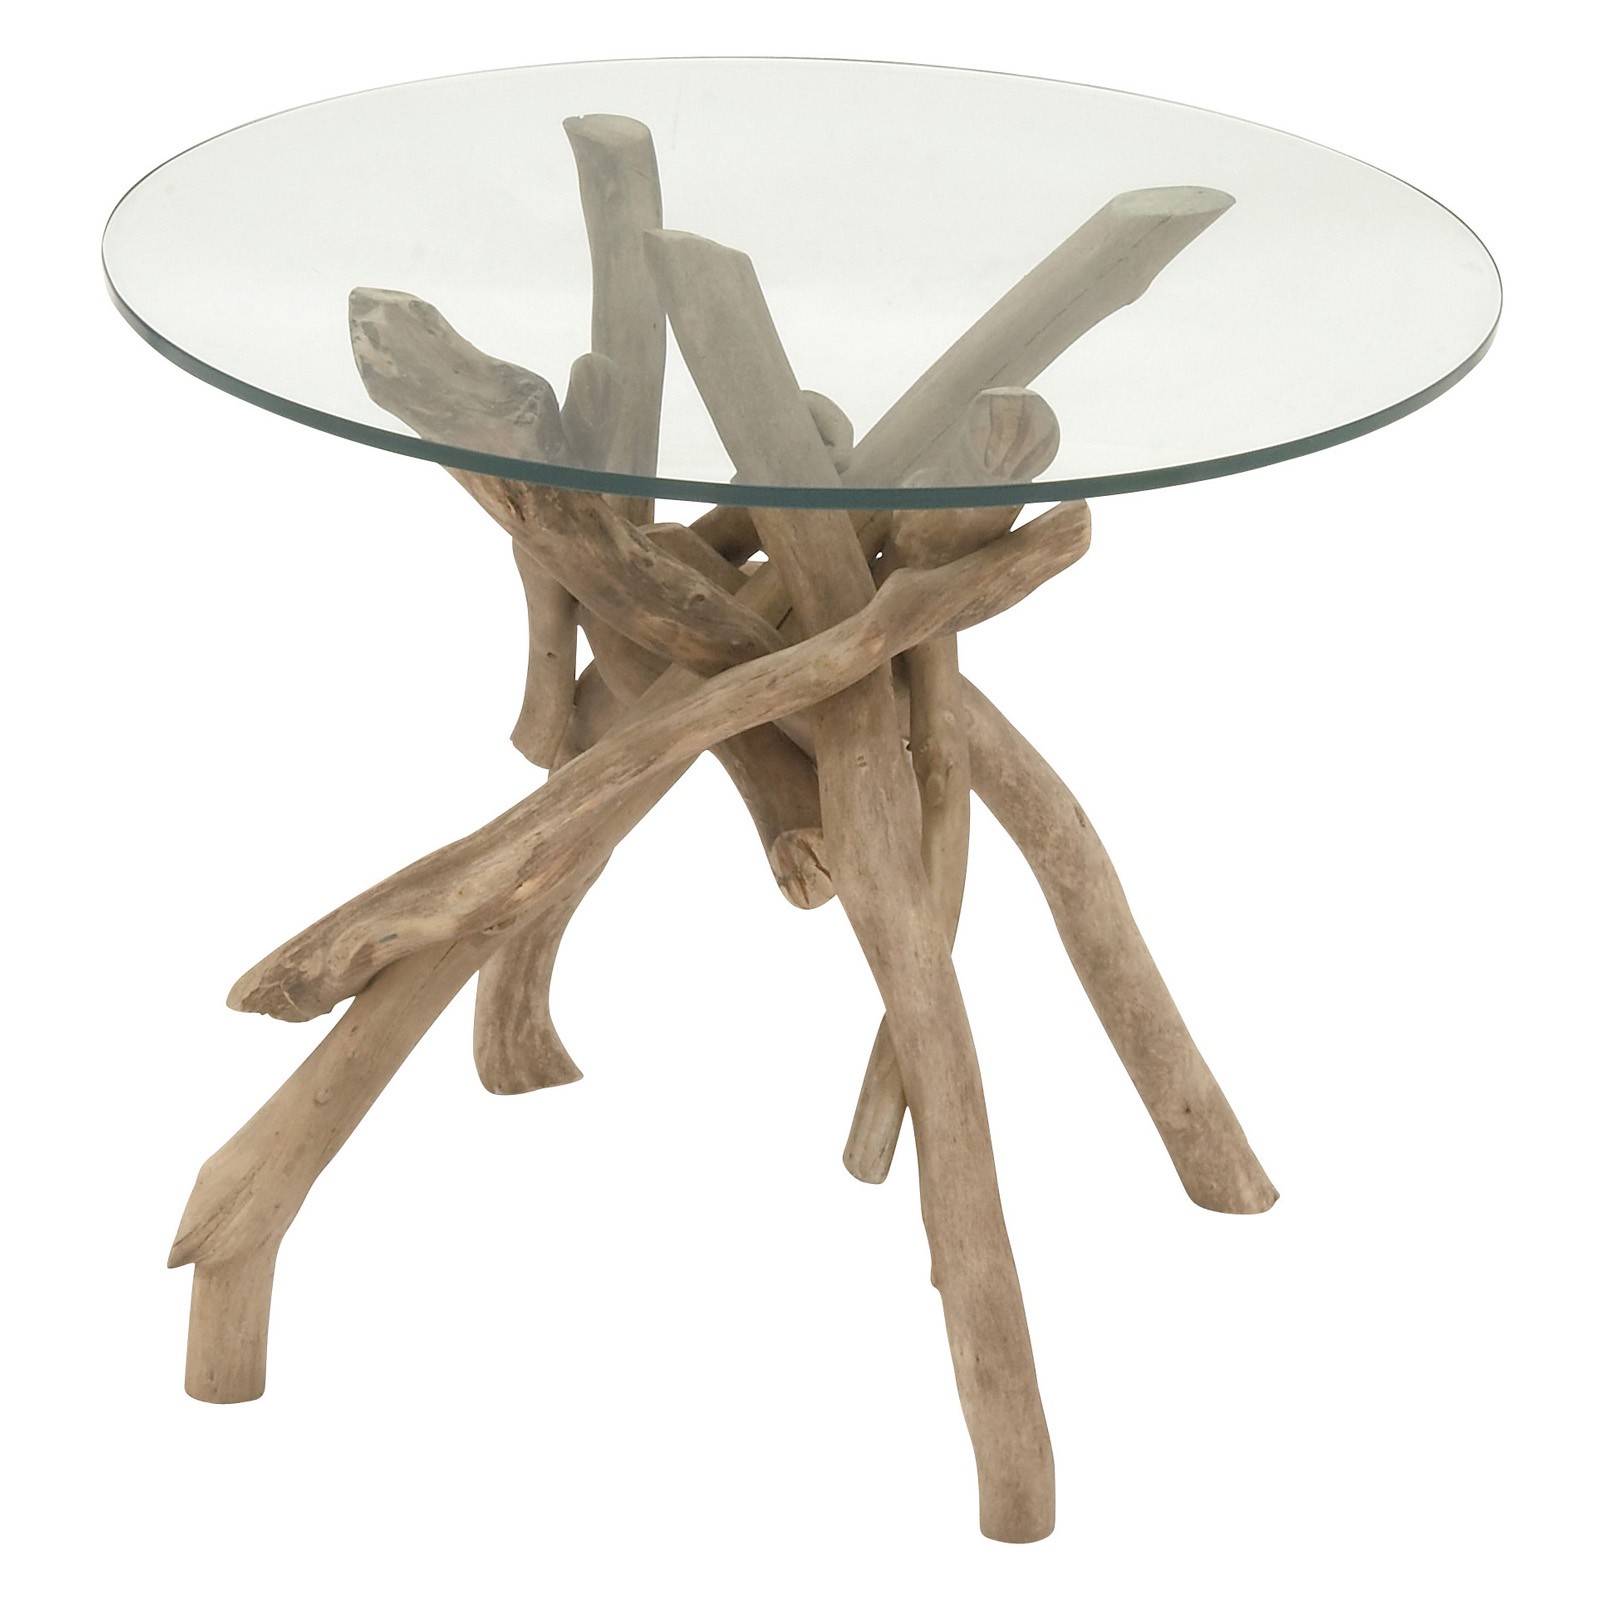 Benzara classy driftwood glass end table 24w x 20h in